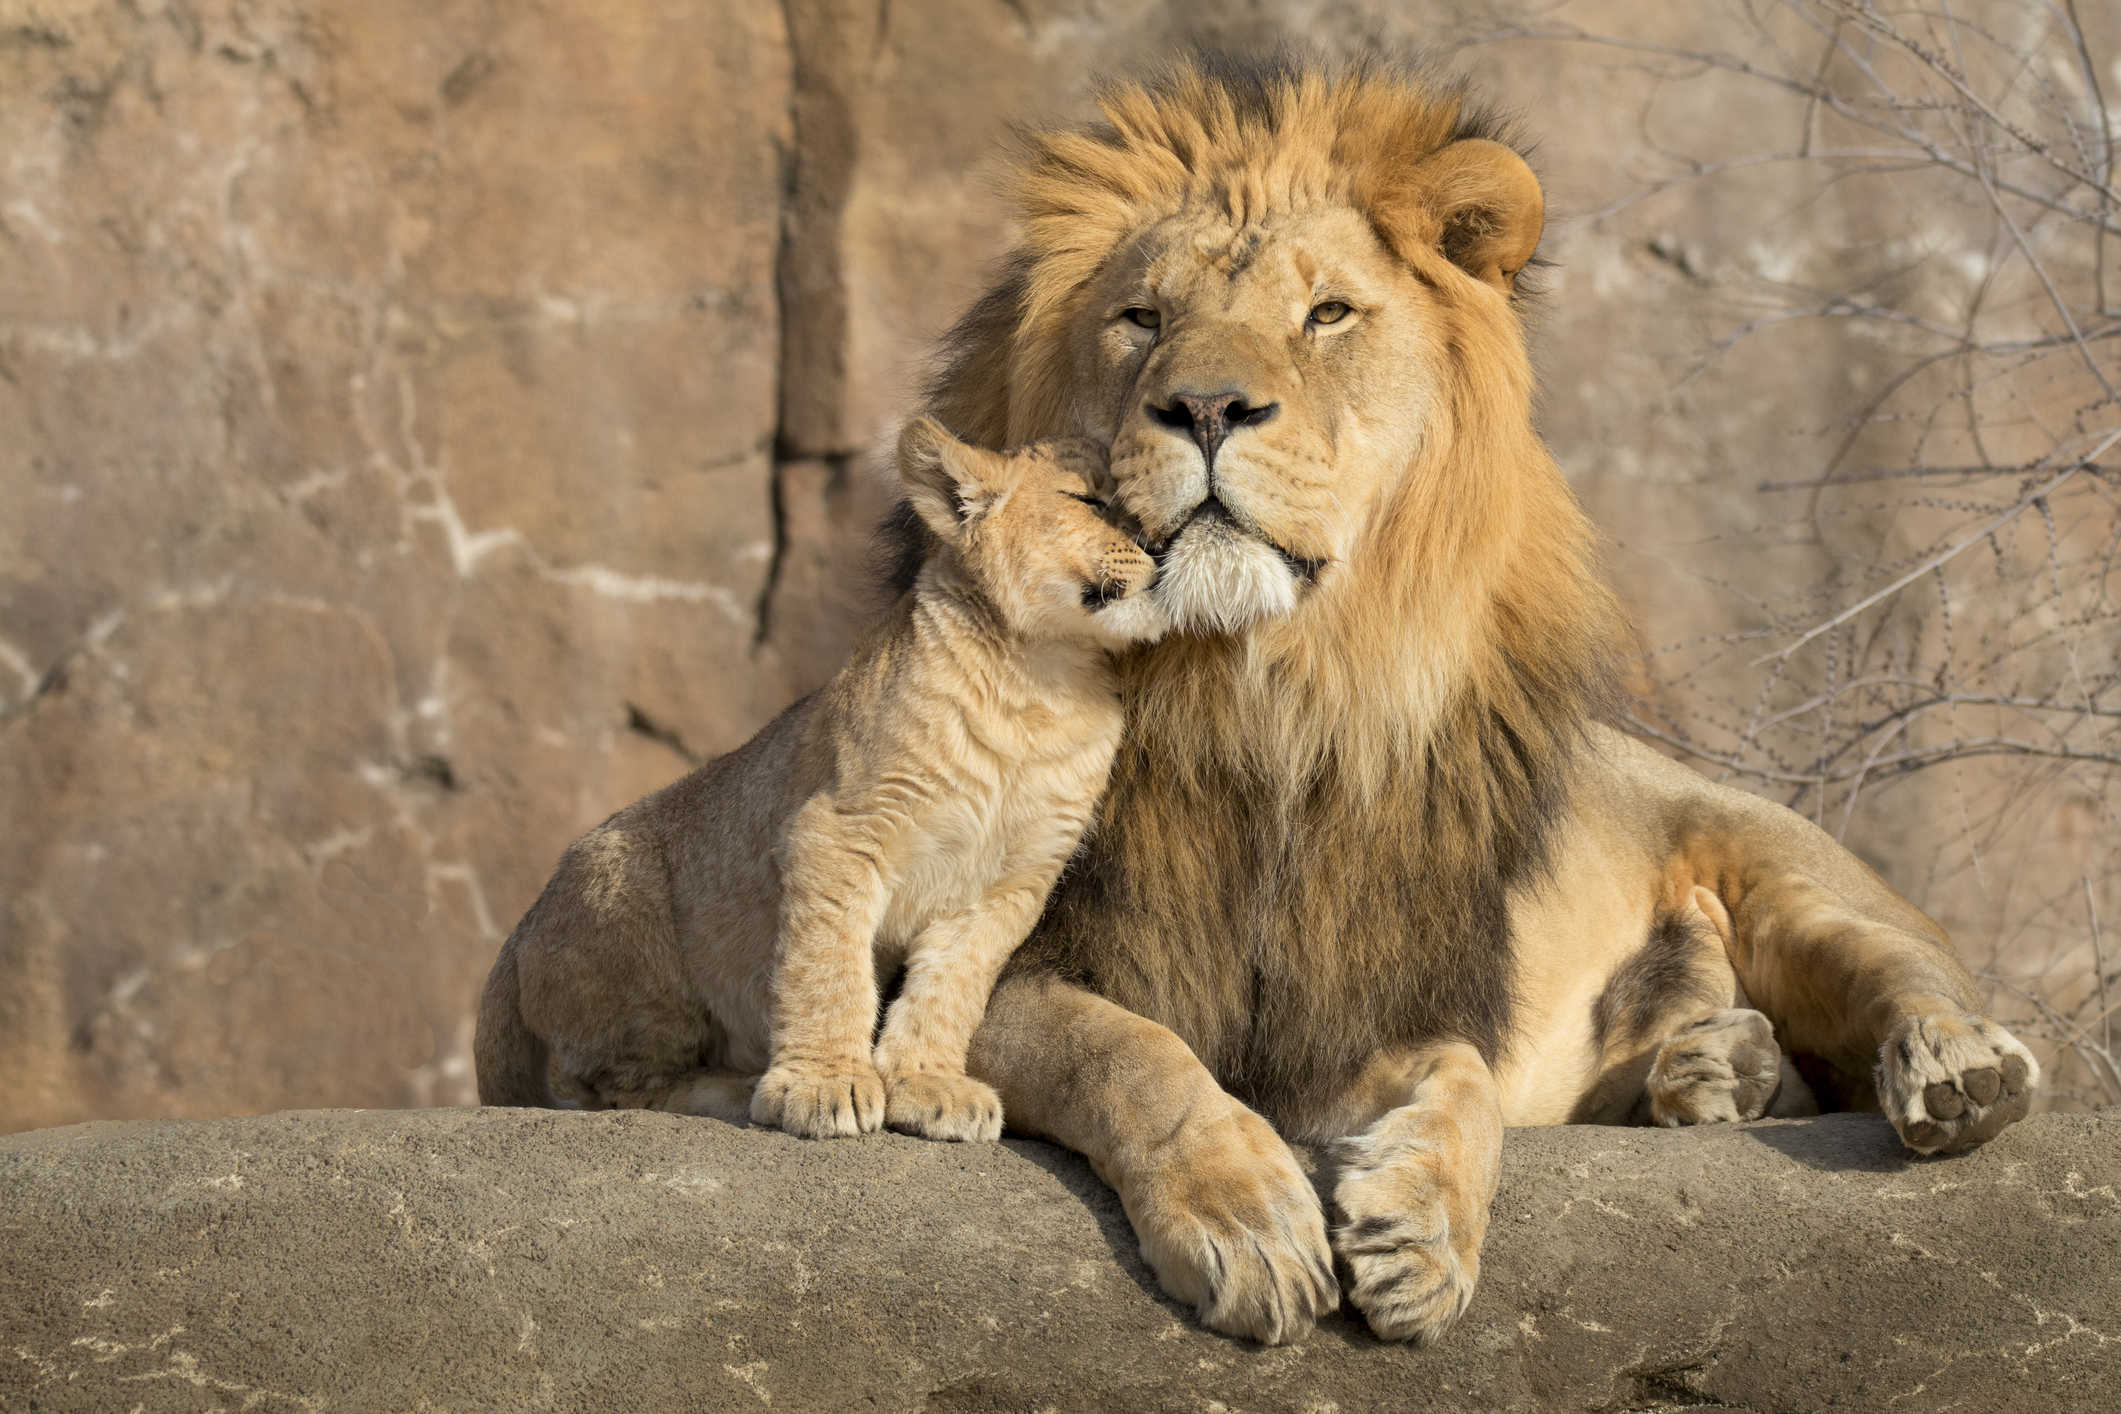 This proud male African lion is cuddled by his cub during an affectionate moment. She is Daddy's girl for sure.